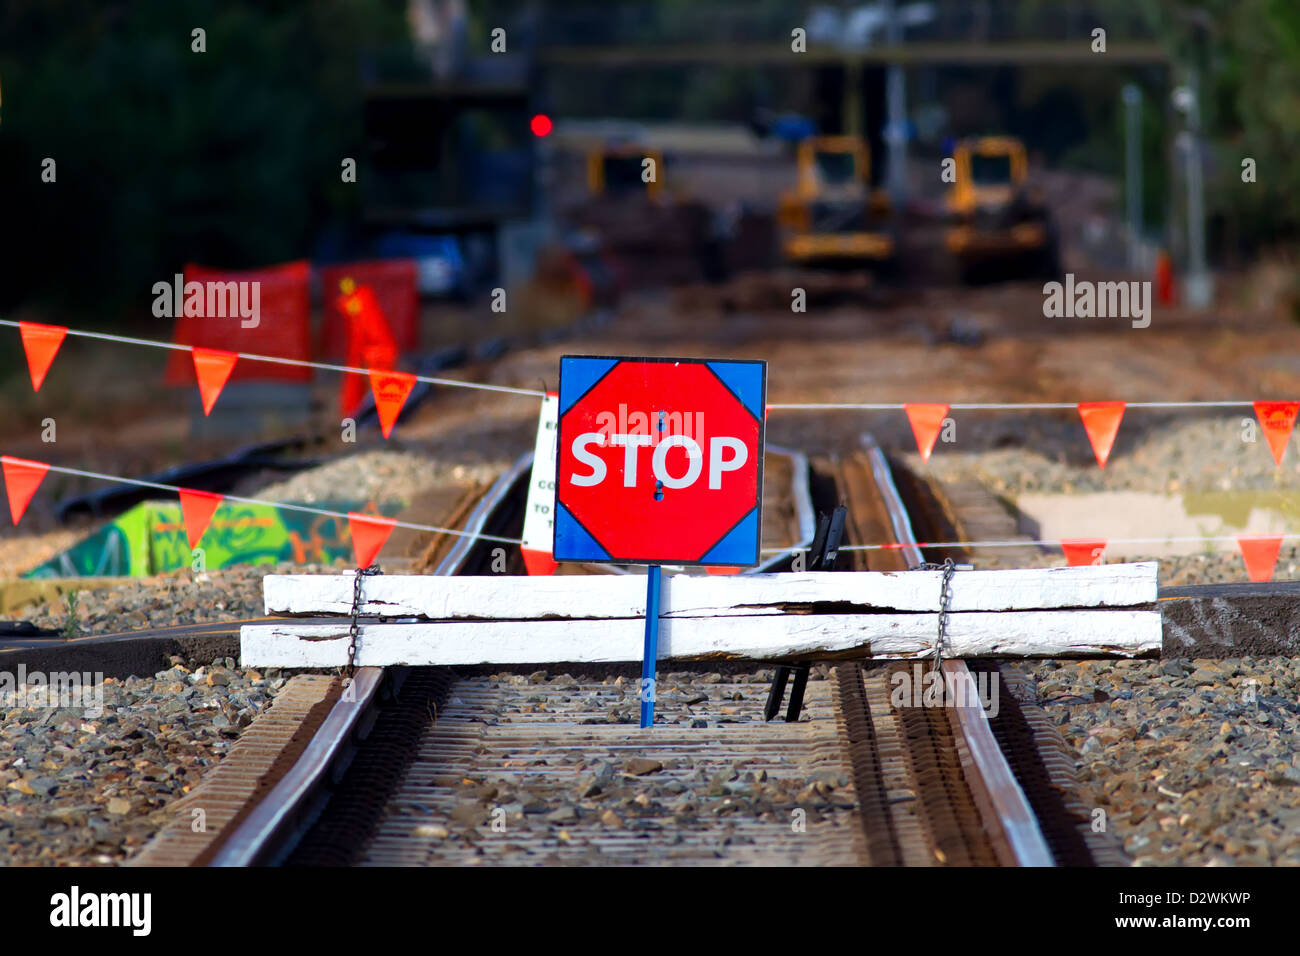 Construction work on the Noarlunga train line in the South Australian city of Adelaide Stock Photo